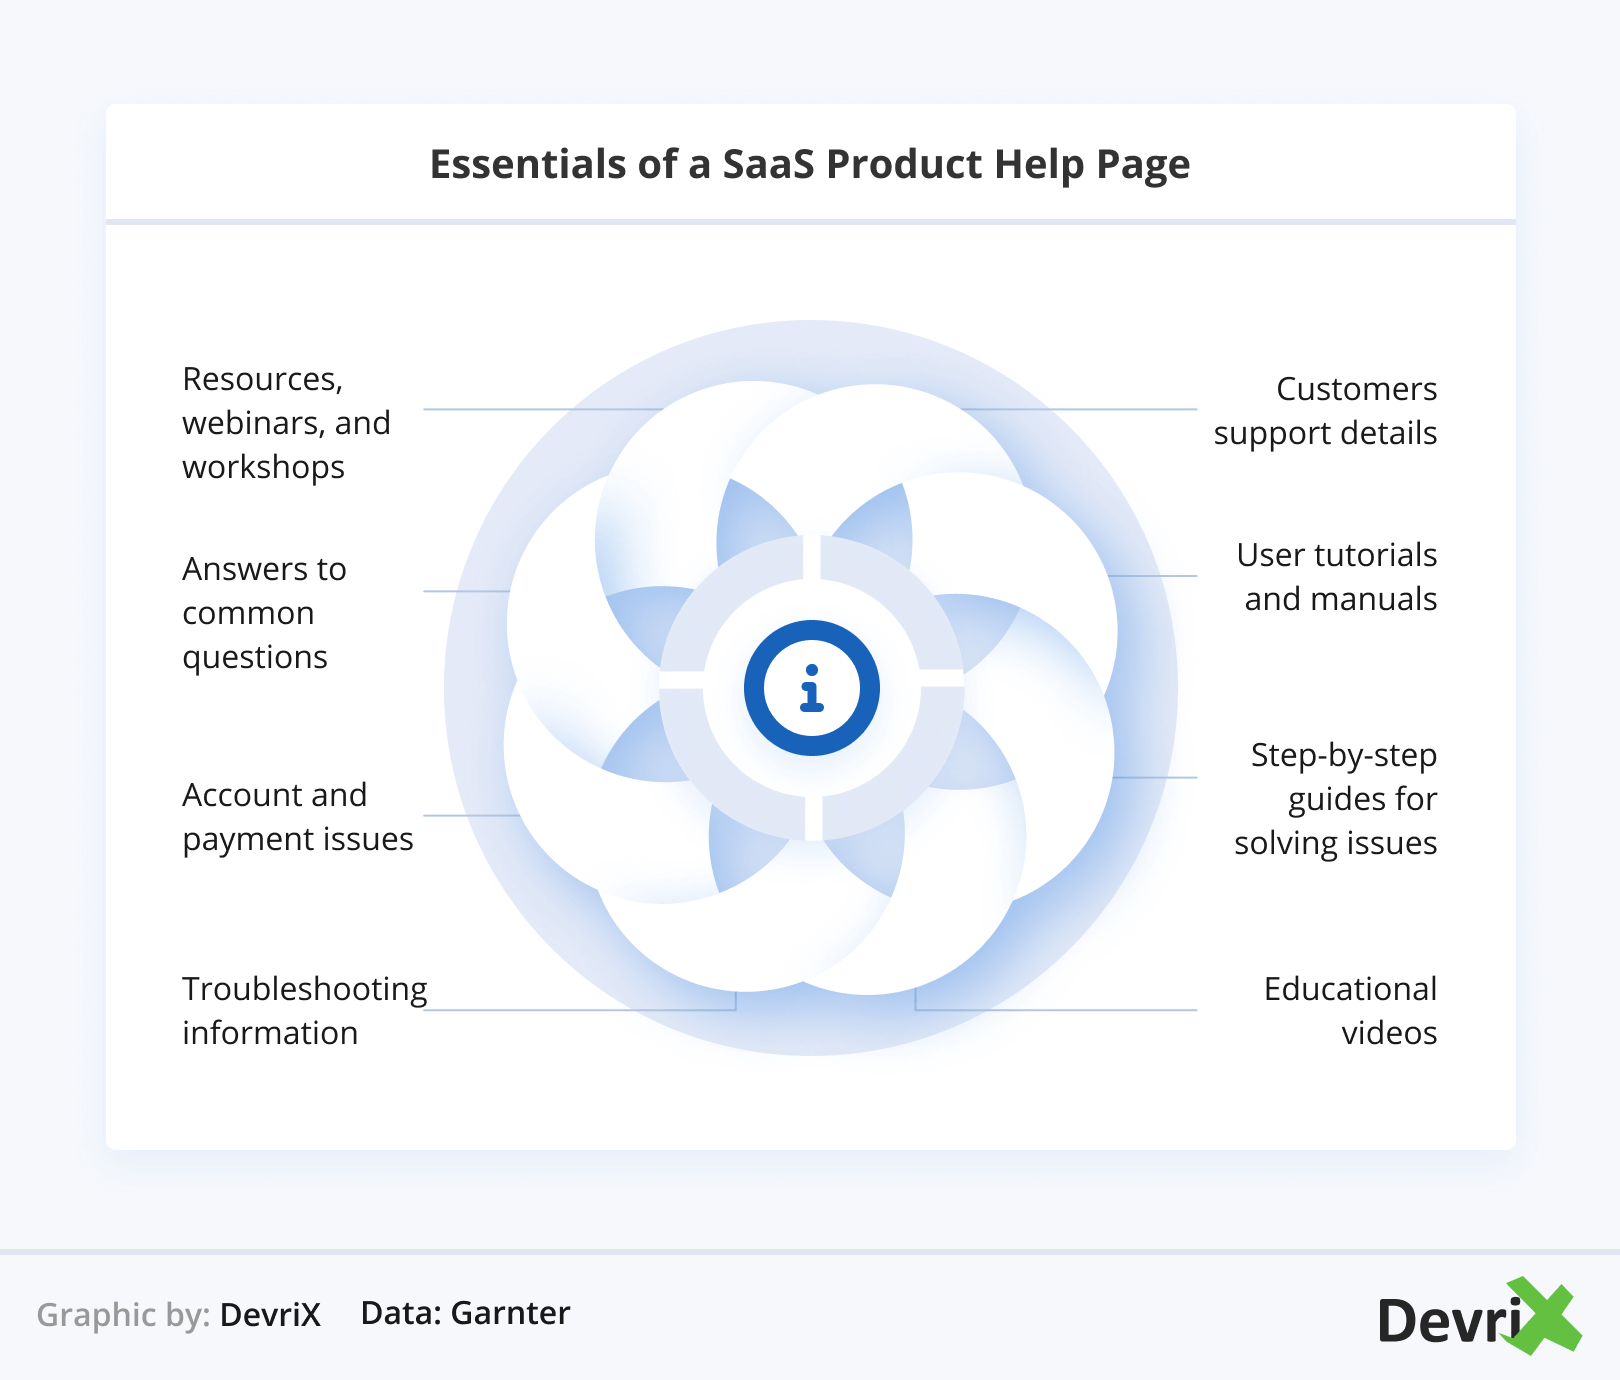 Essentials of a SaaS Product Help Page